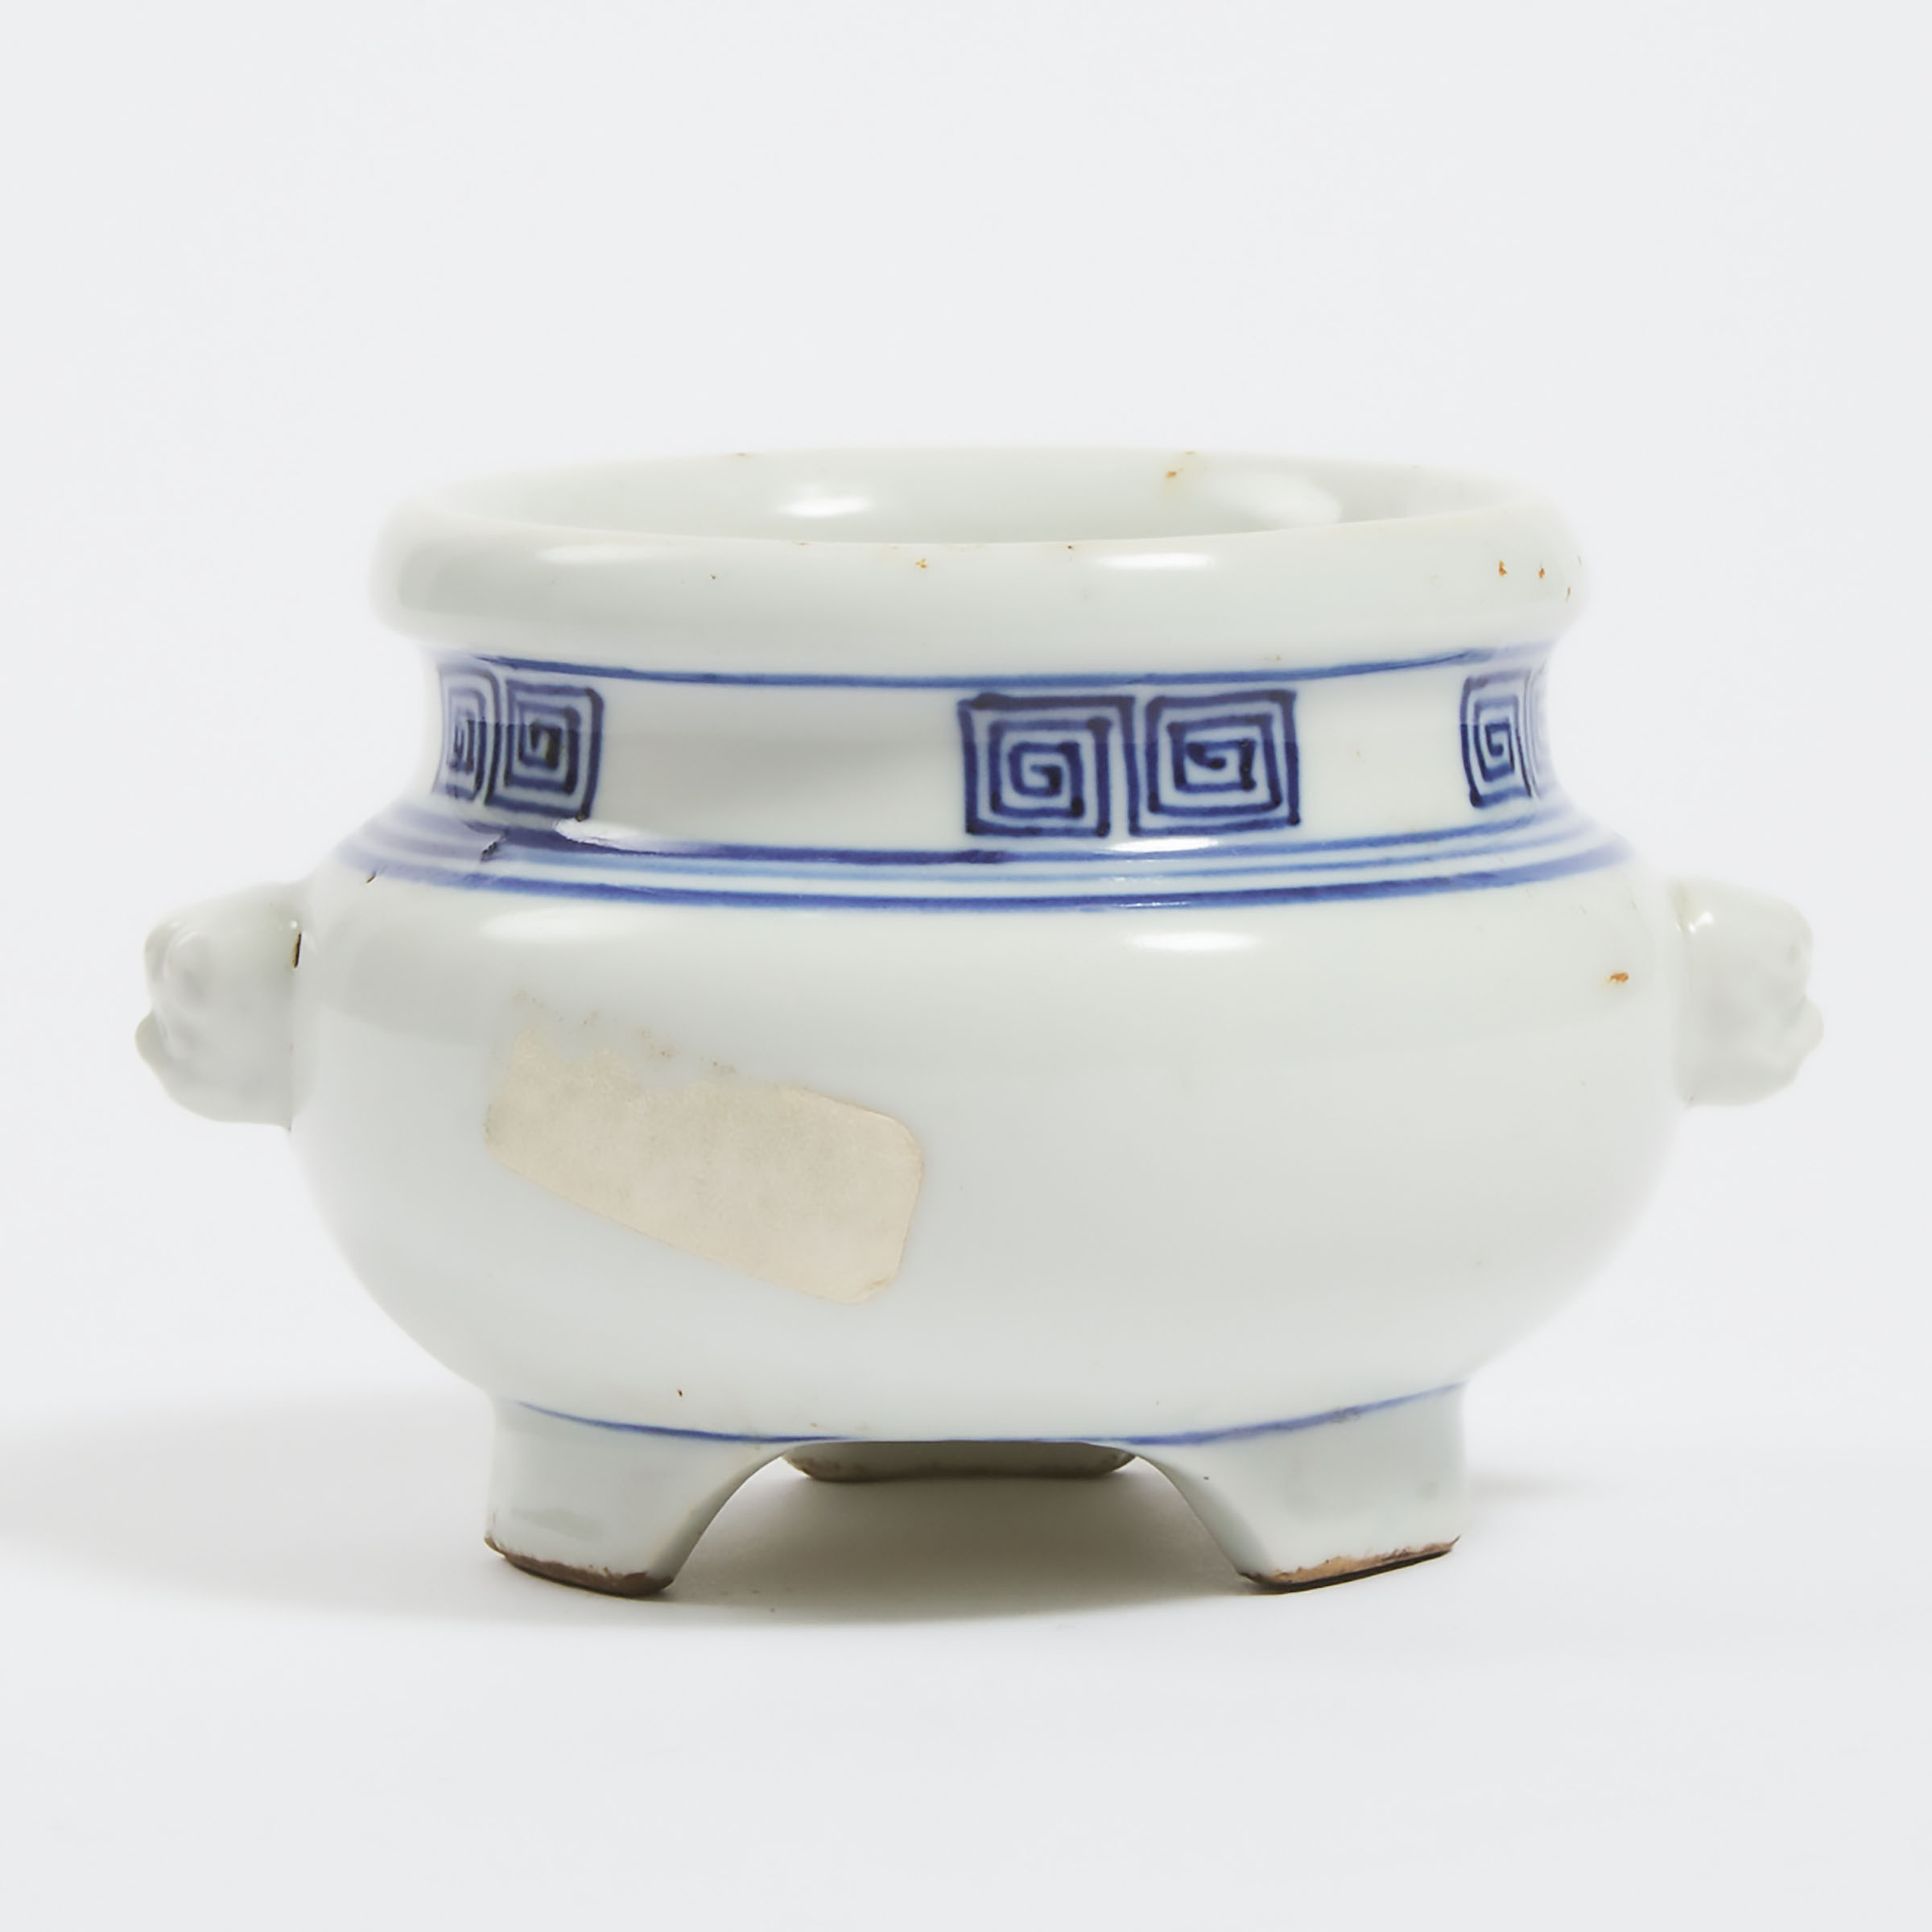 A Small Blue and White Porcelain Censer, Wanli Mark, Early 20th Century